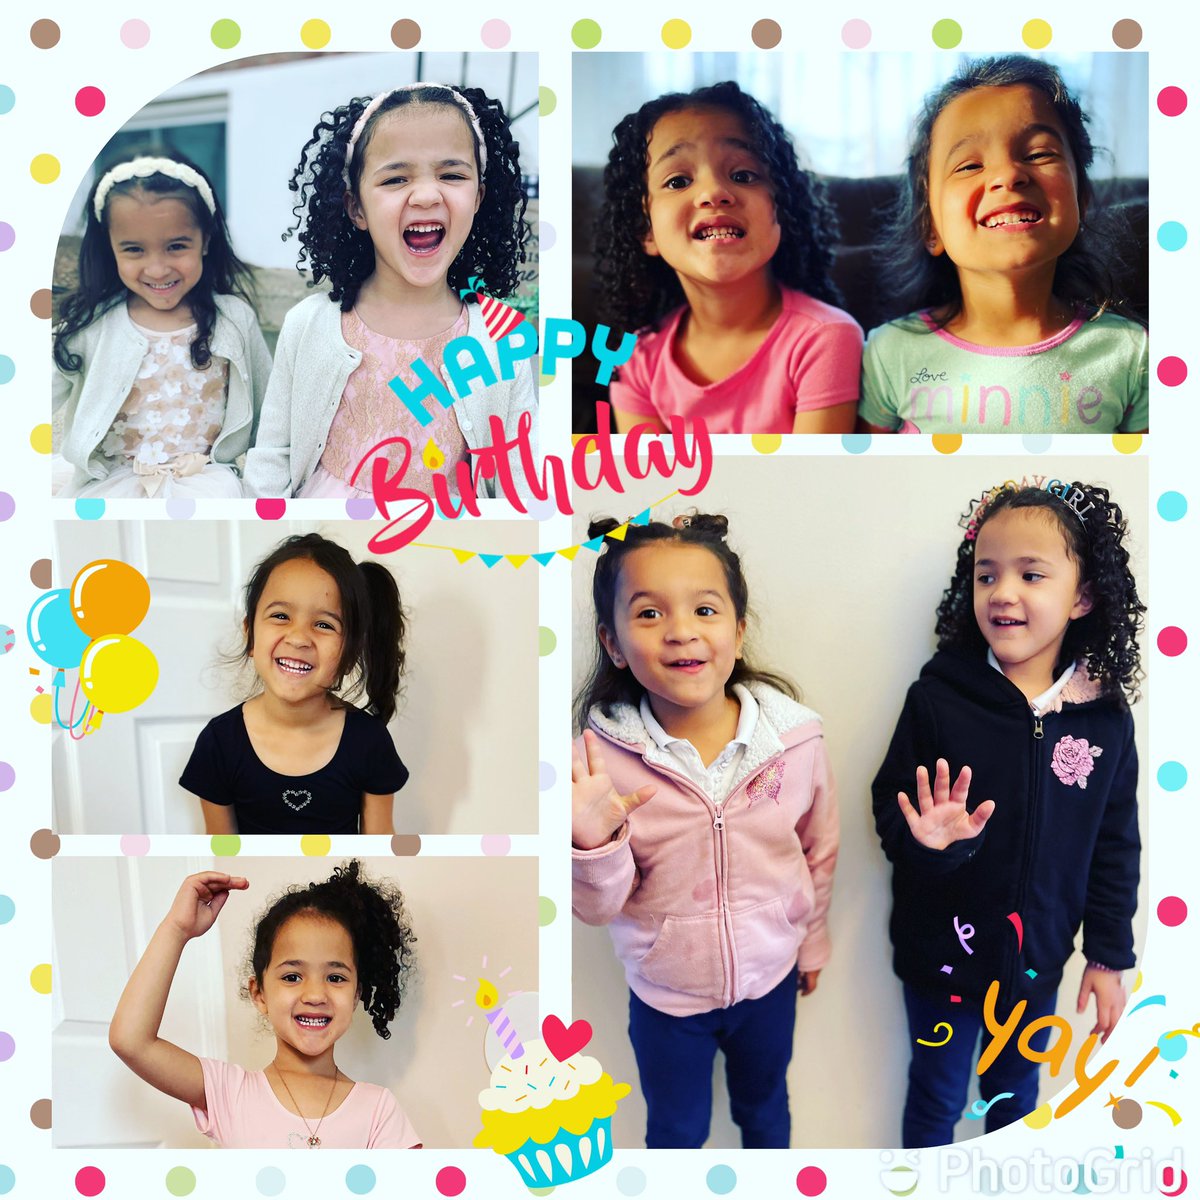 Happy Birthday to the most #incredibletwins that a dad could ever ask for. Our #chiquitas have grown up quickly in 5 years and amaze Anietra and I everyday. We love you Cat and Avi! Happy Birthday!! 🎉🎂🎊🎈